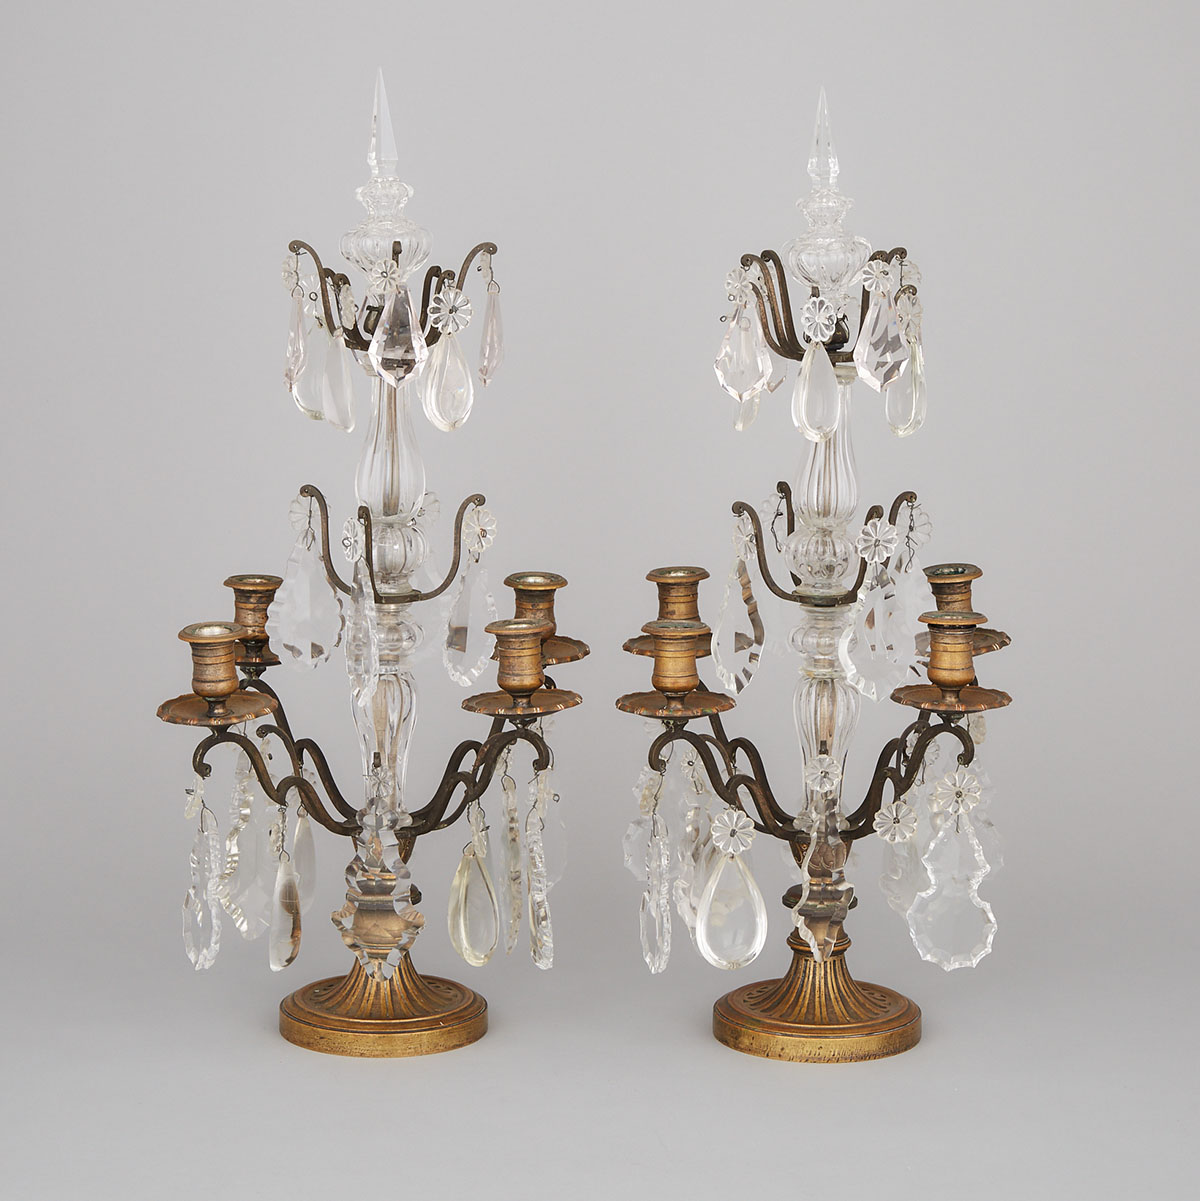 Pair of Louis XV Style Gilt Bronze and Cut Glass Girandoles, 19th/early 20th century